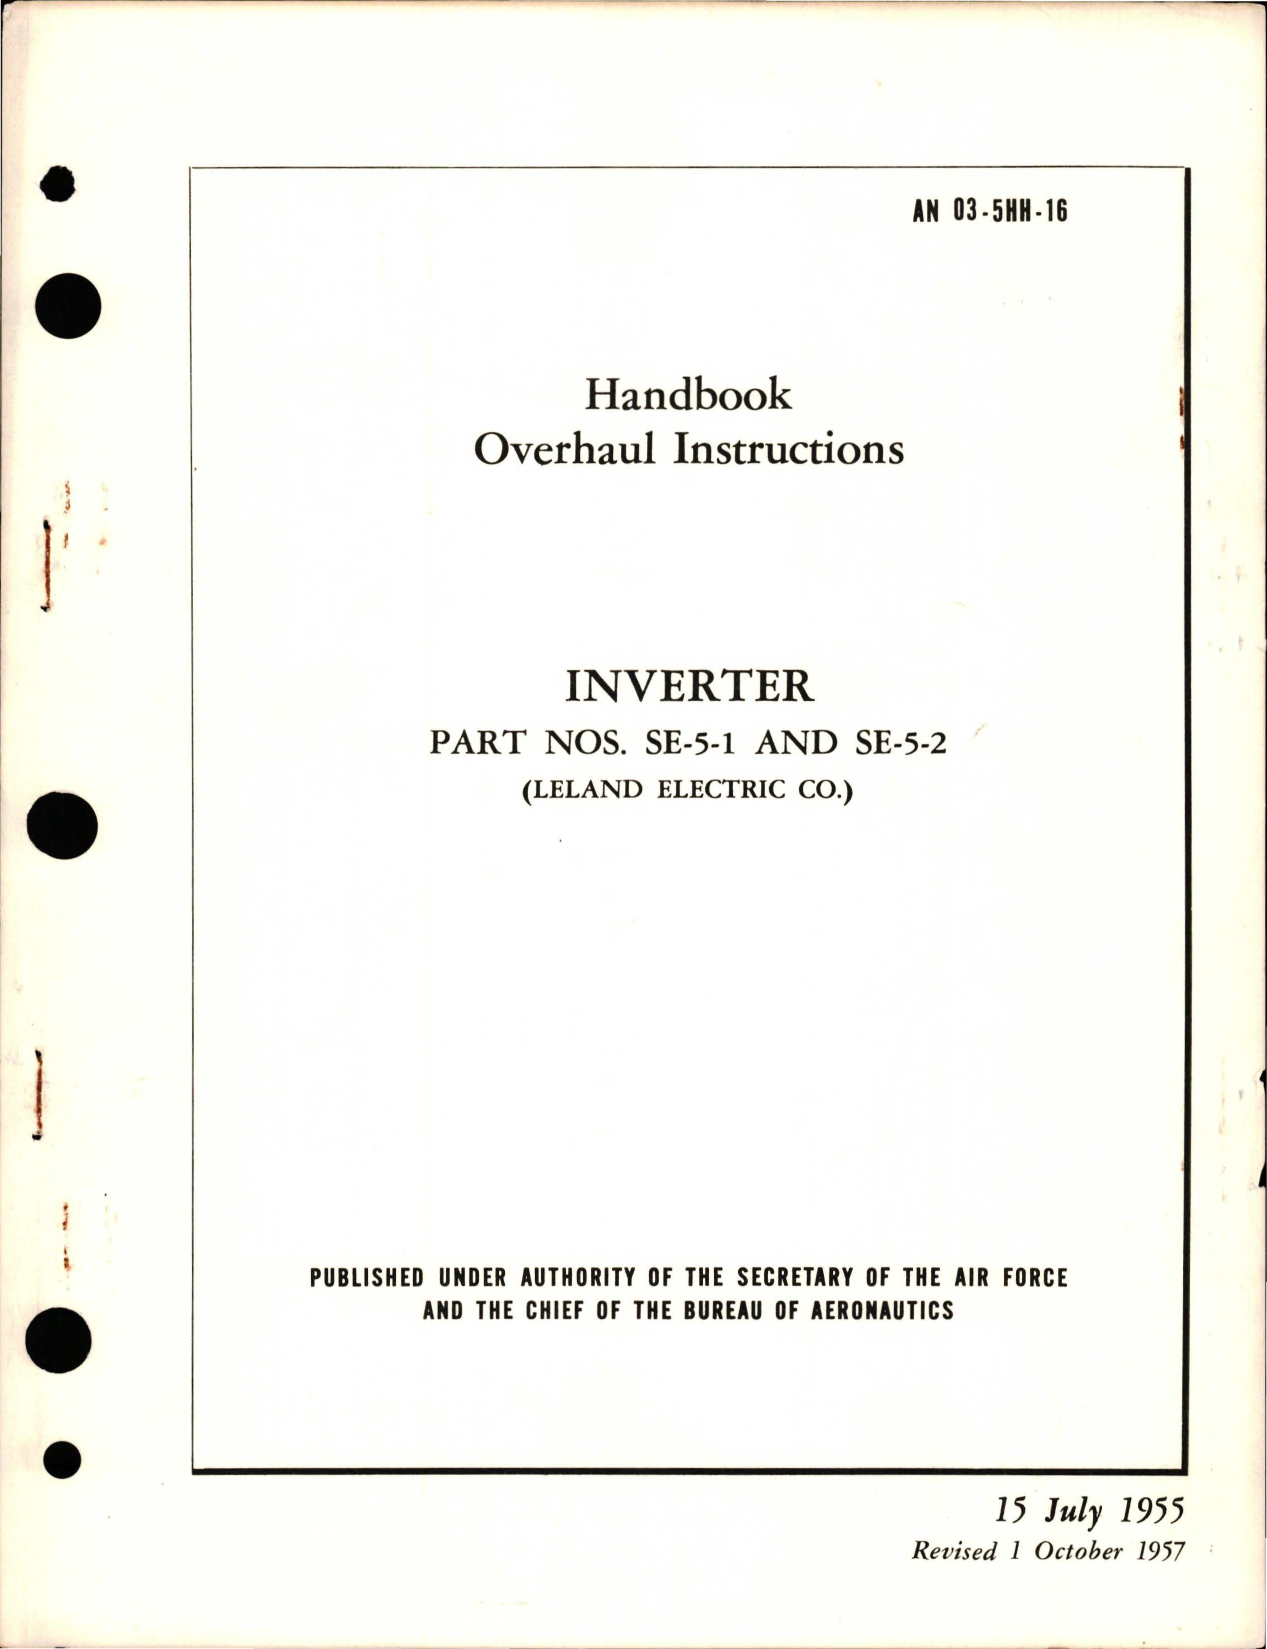 Sample page 1 from AirCorps Library document: Overhaul Instructions for Inverter - Parts SE-5-1 and SE-5-2